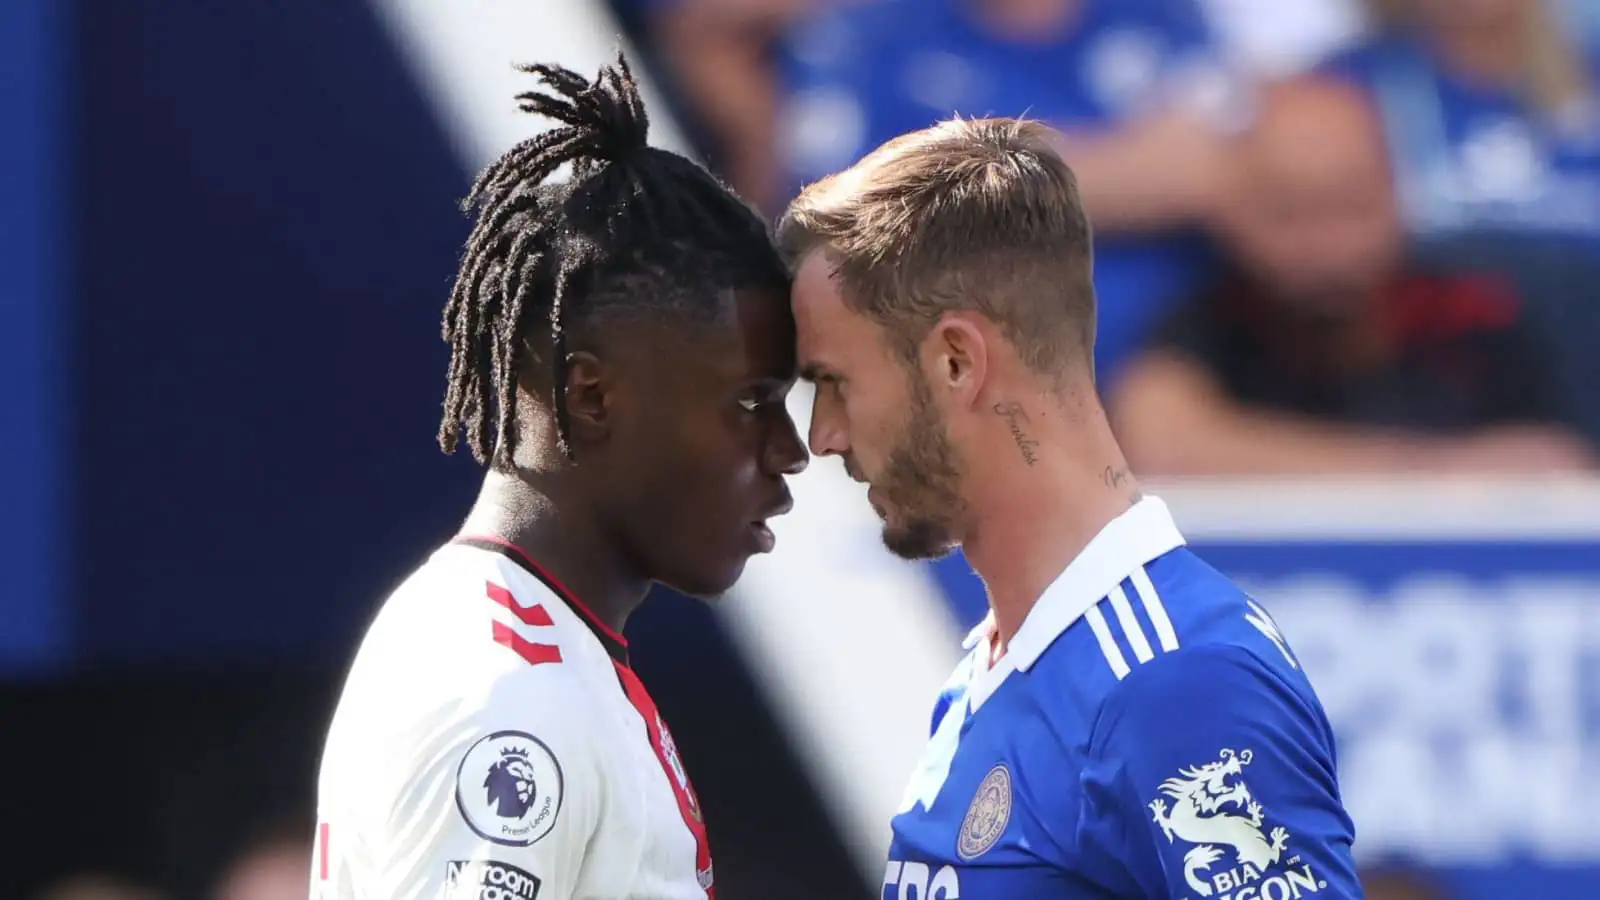 Southampton midfielder Romeo Lavia and Leicester City playmaker James Maddison